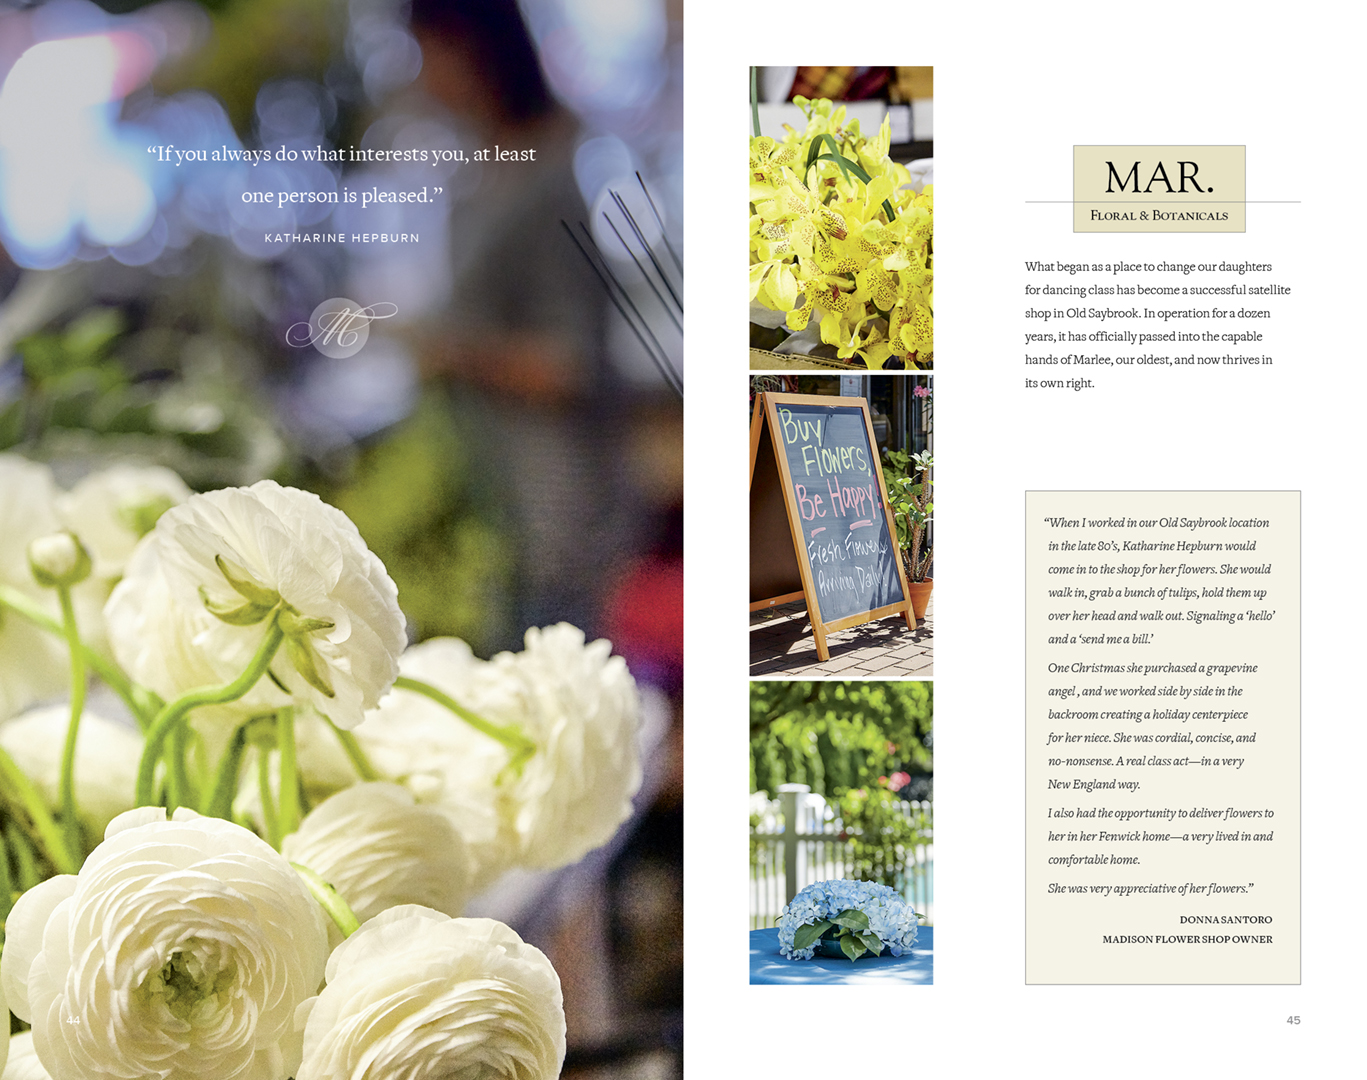 Madison Flower Shop Anniversary Edition Booklet: “If you always do what interests you, at least one person is pleased.” Eleanor Roosevelt